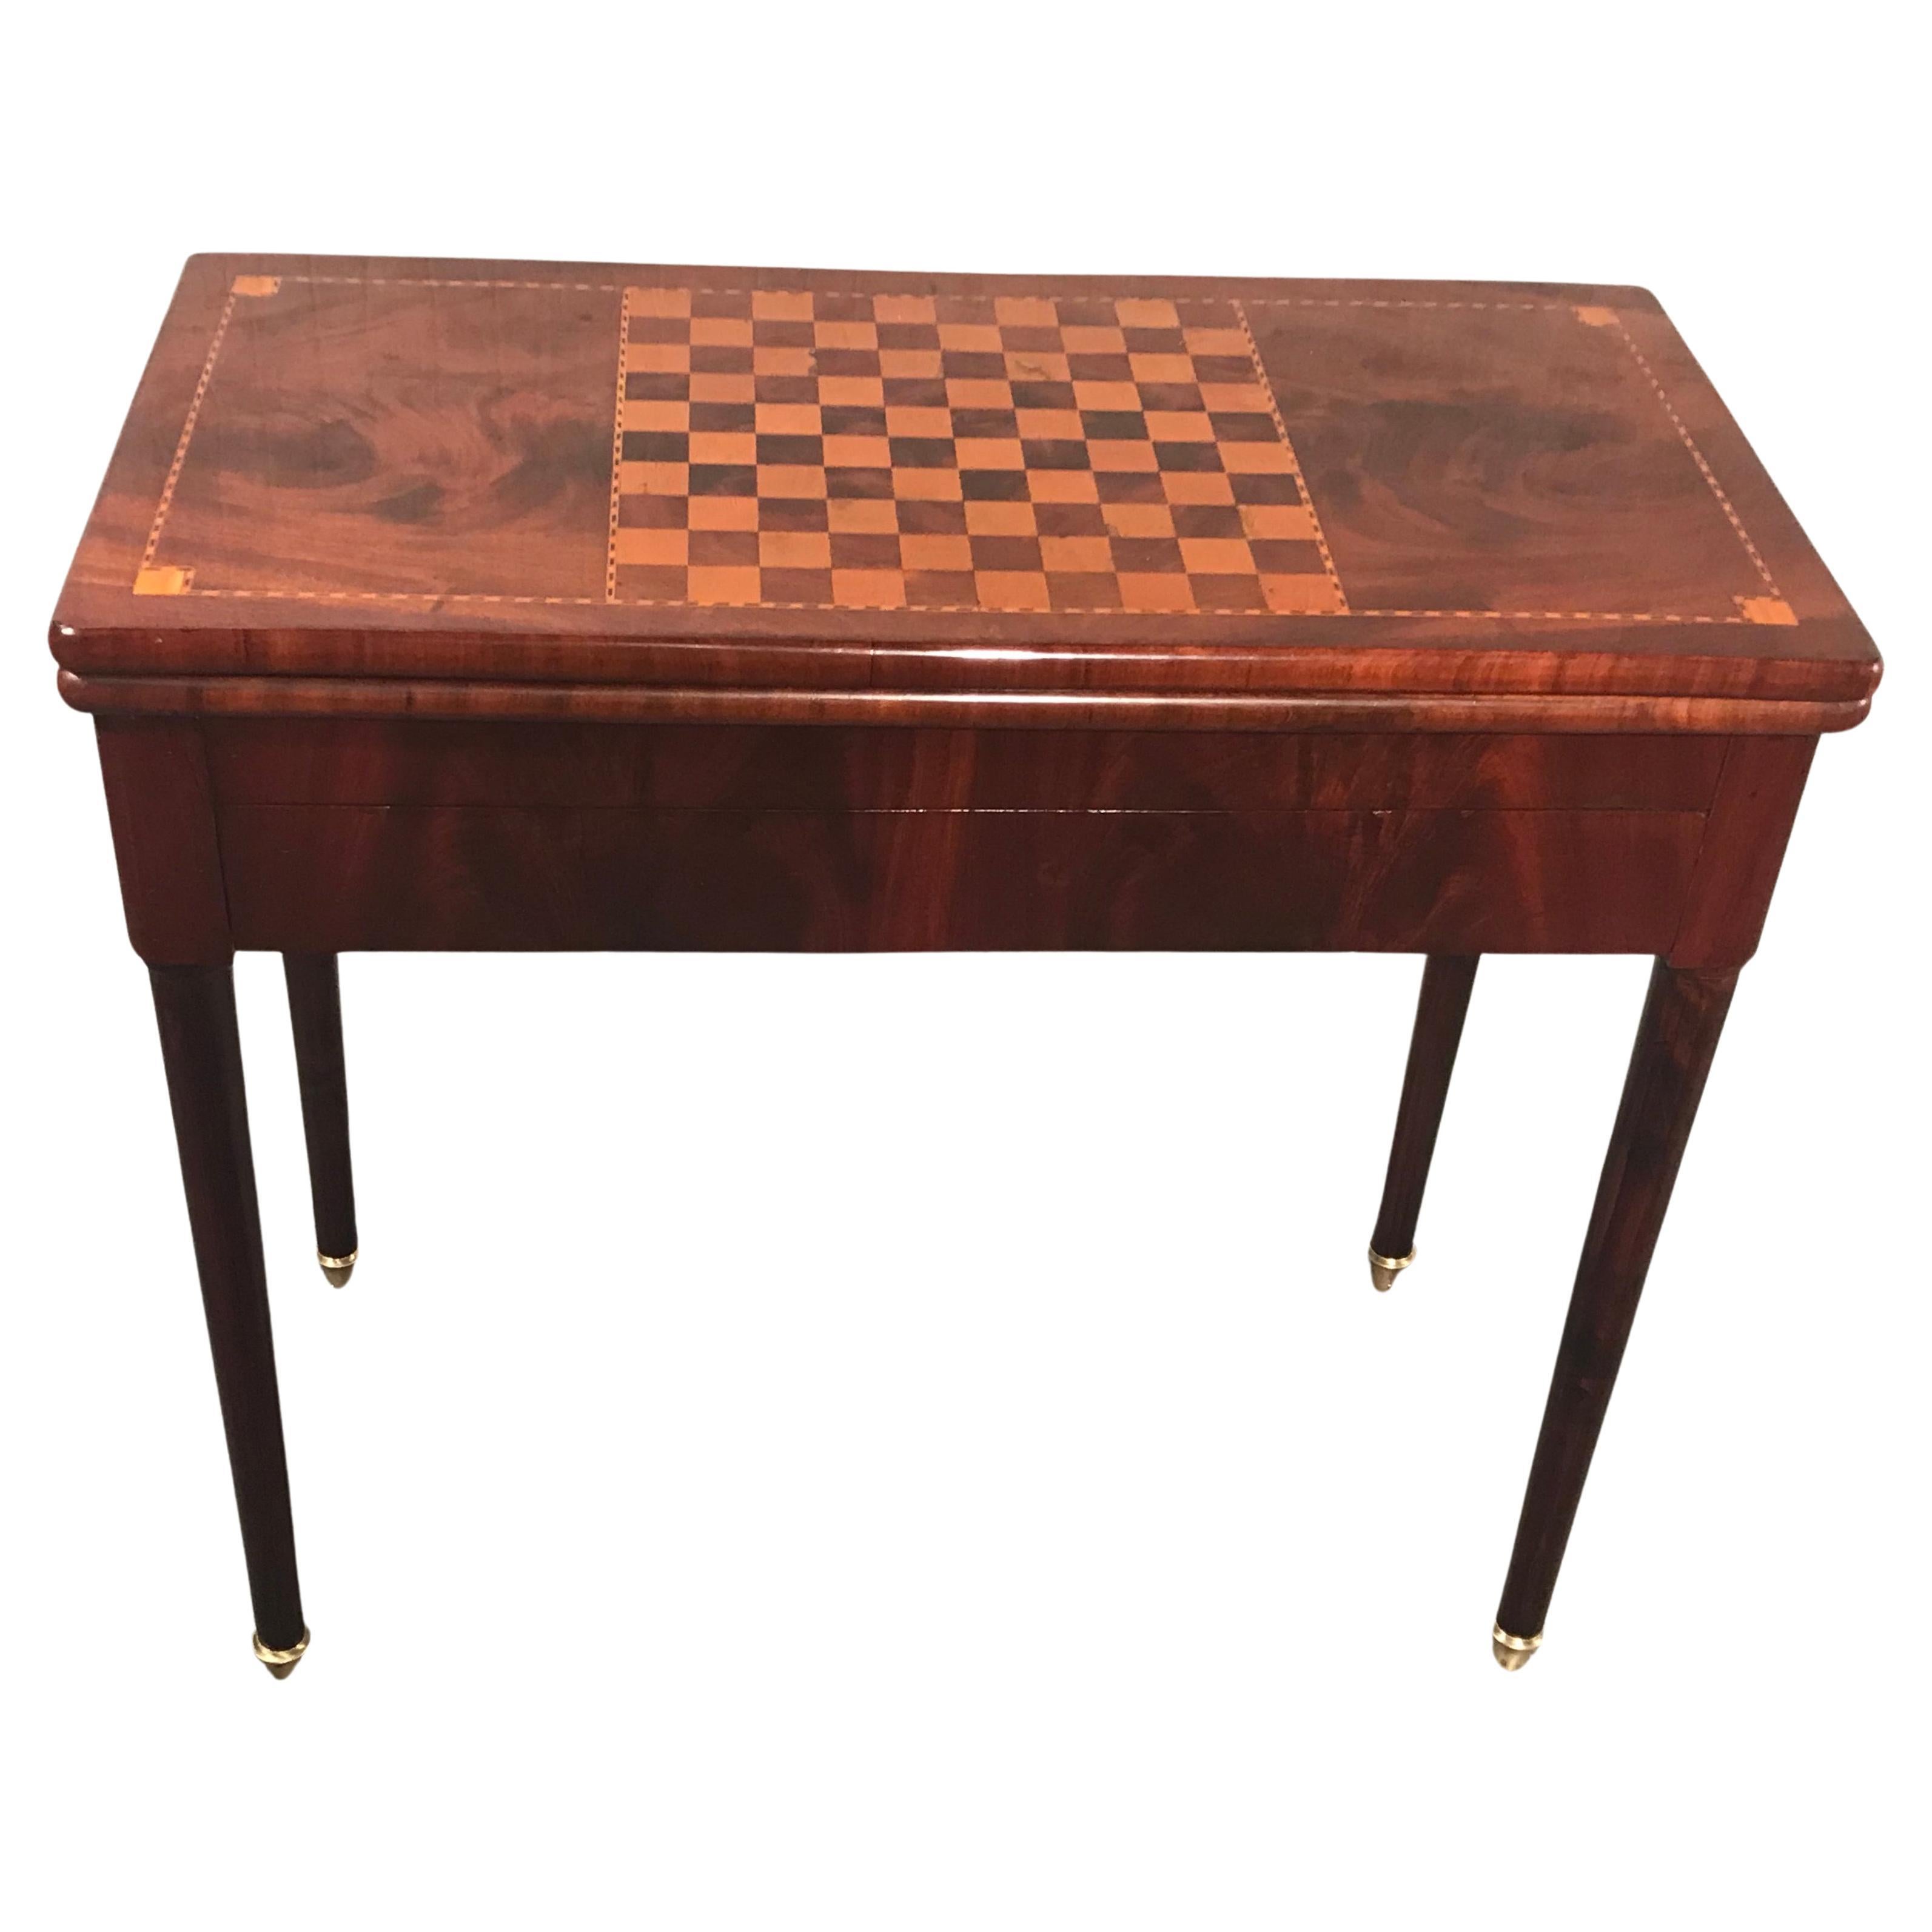 Neoclassical Game Table, France 1810-20, Mahogany